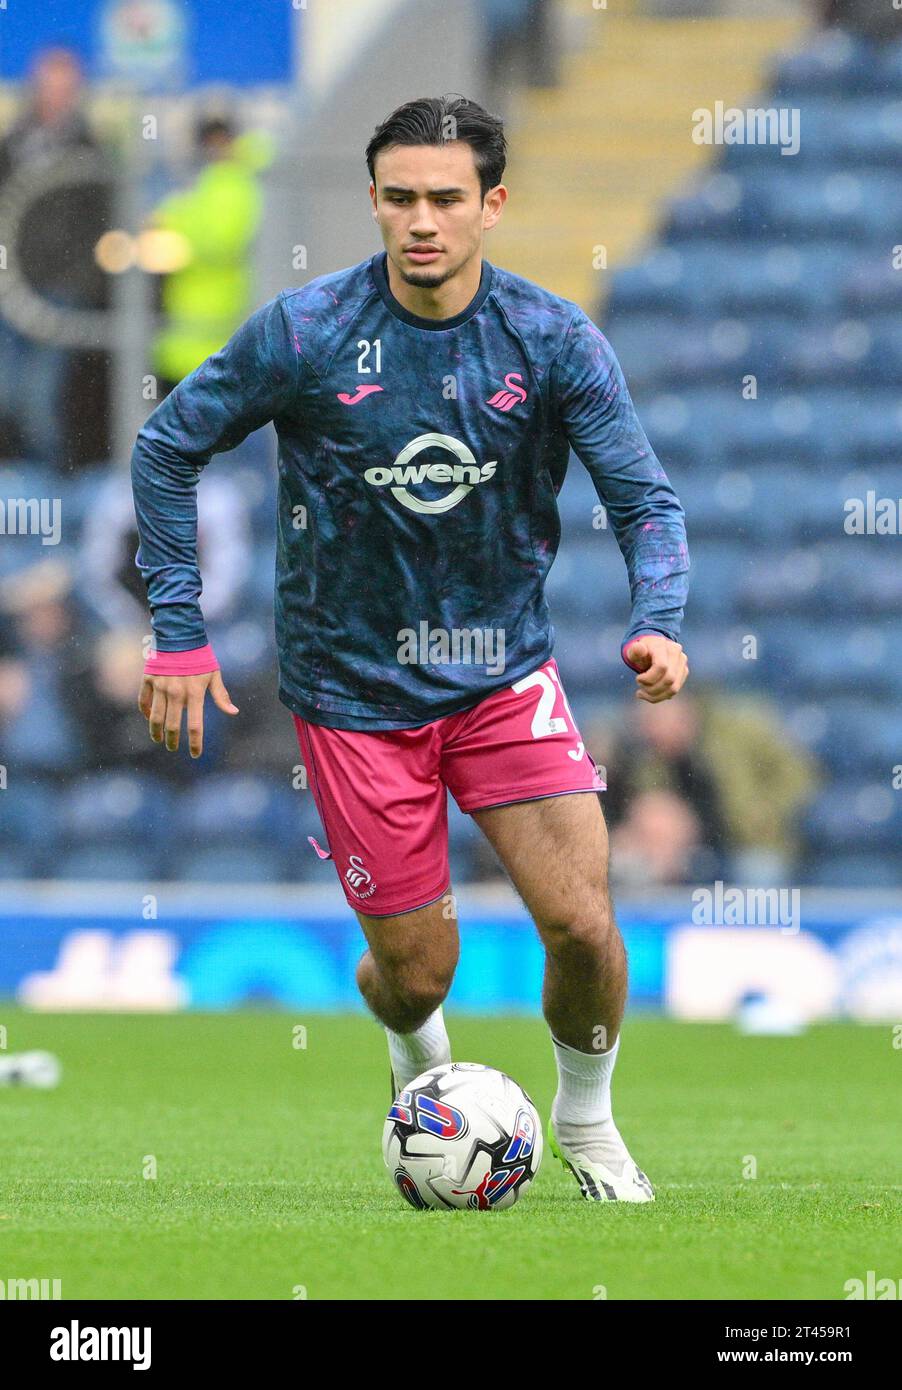 Blackburn, UK. 28th Oct, 2023. Nathan Tjoe-A-On 21# of Swansea City Association Football Club warms up ahead of the match, during the Sky Bet Championship match Blackburn Rovers vs Swansea City at Ewood Park, Blackburn, United Kingdom, 28th October 2023 (Photo by Cody Froggatt/News Images) in Blackburn, United Kingdom on 10/28/2023. (Photo by Cody Froggatt/News Images/Sipa USA) Credit: Sipa USA/Alamy Live News Stock Photo